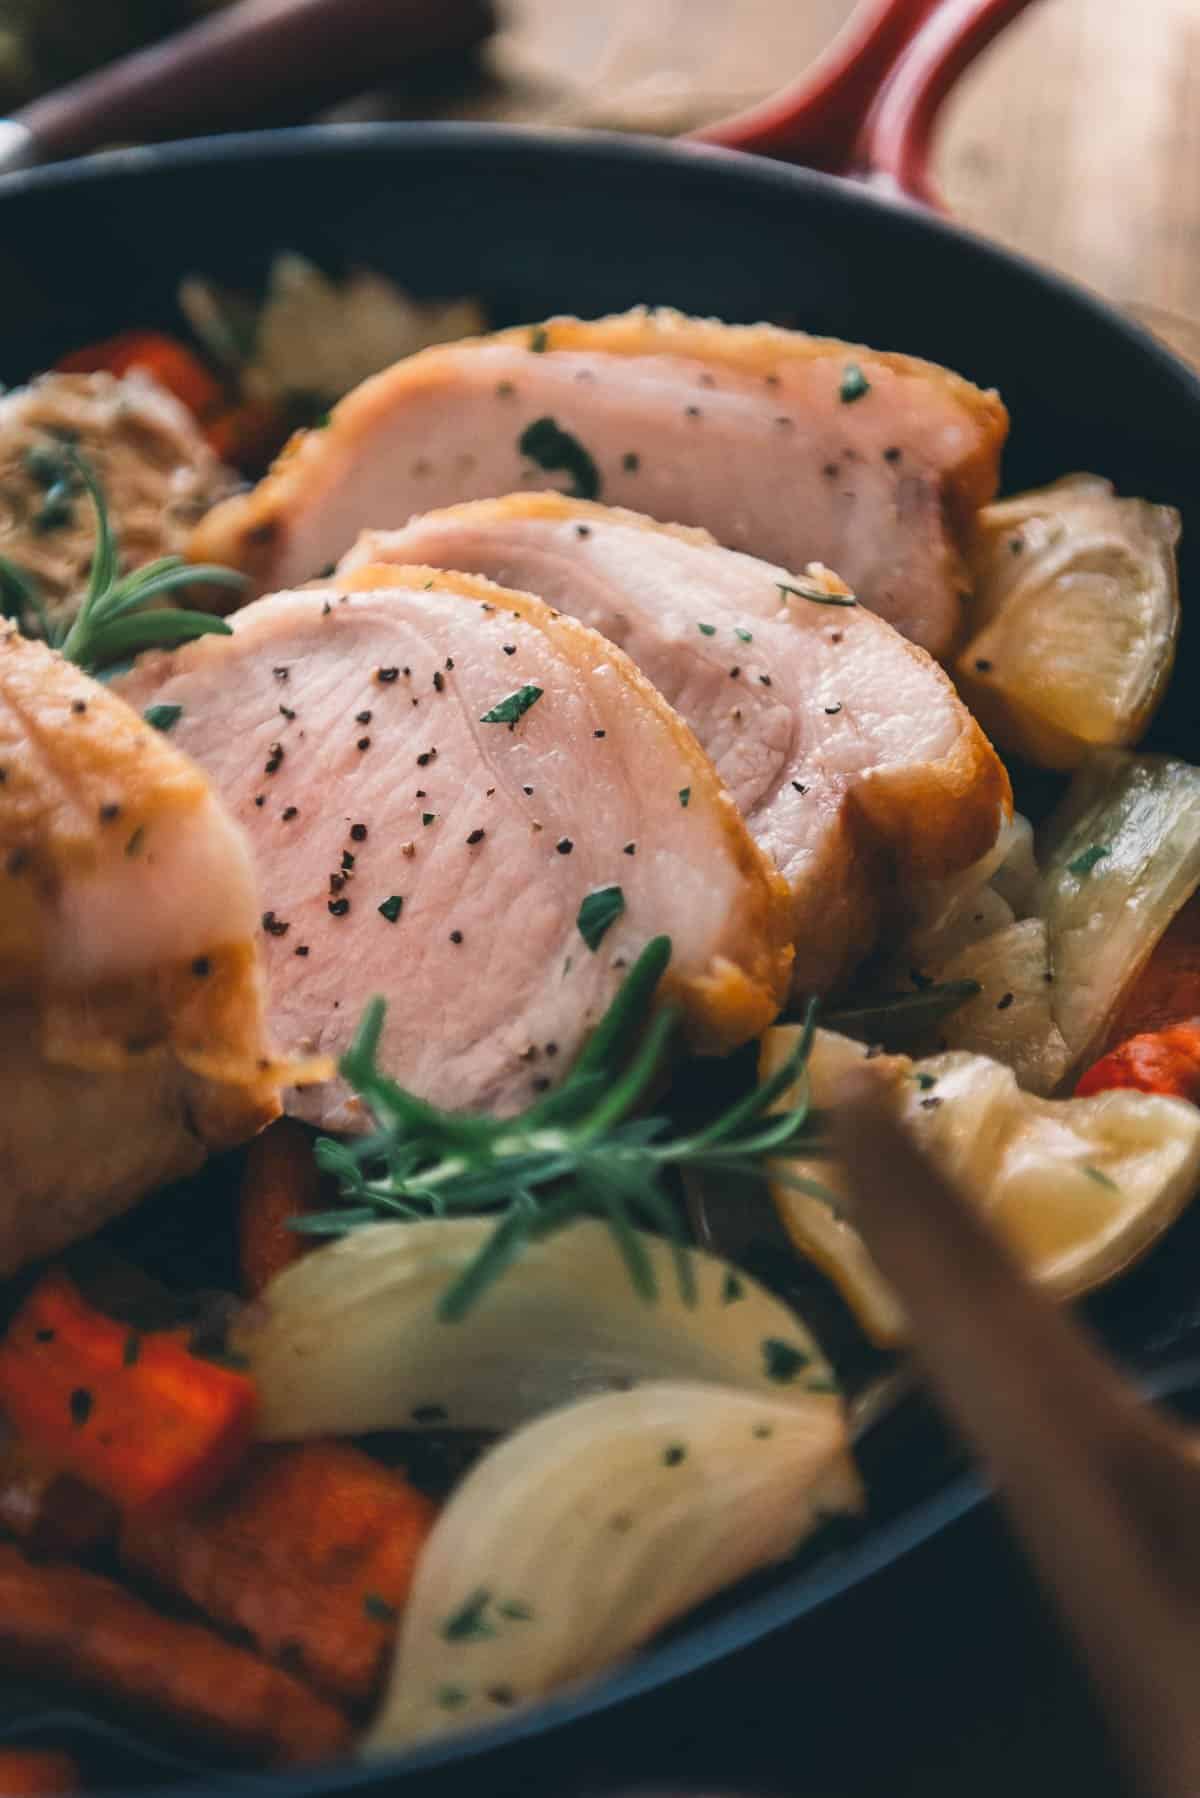 A cast iron skillet full of pork slices and vegetables on a table.